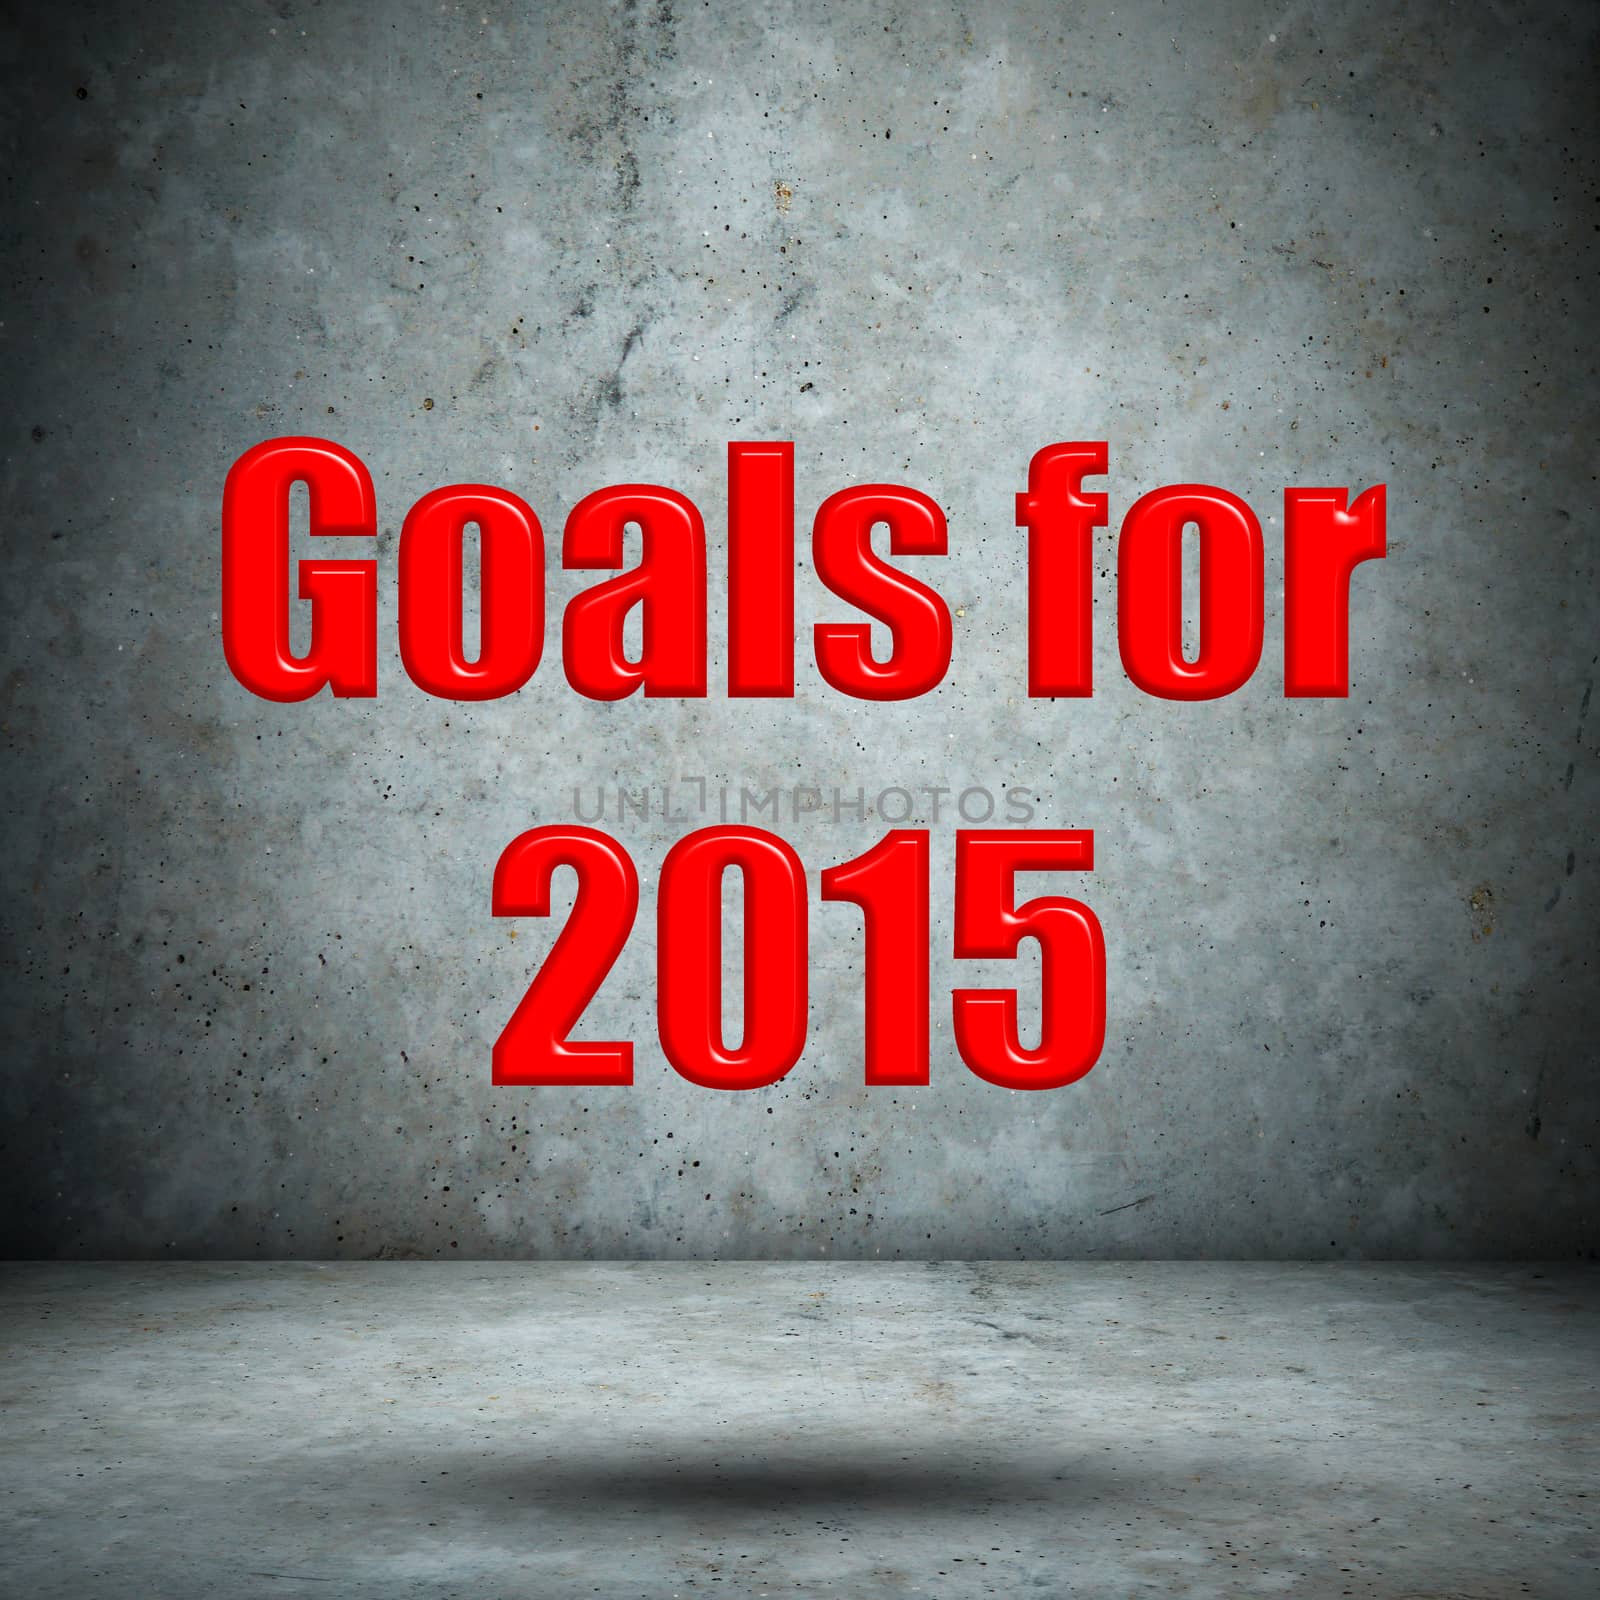 Goals for 2015 on concrete wall by tuk69tuk